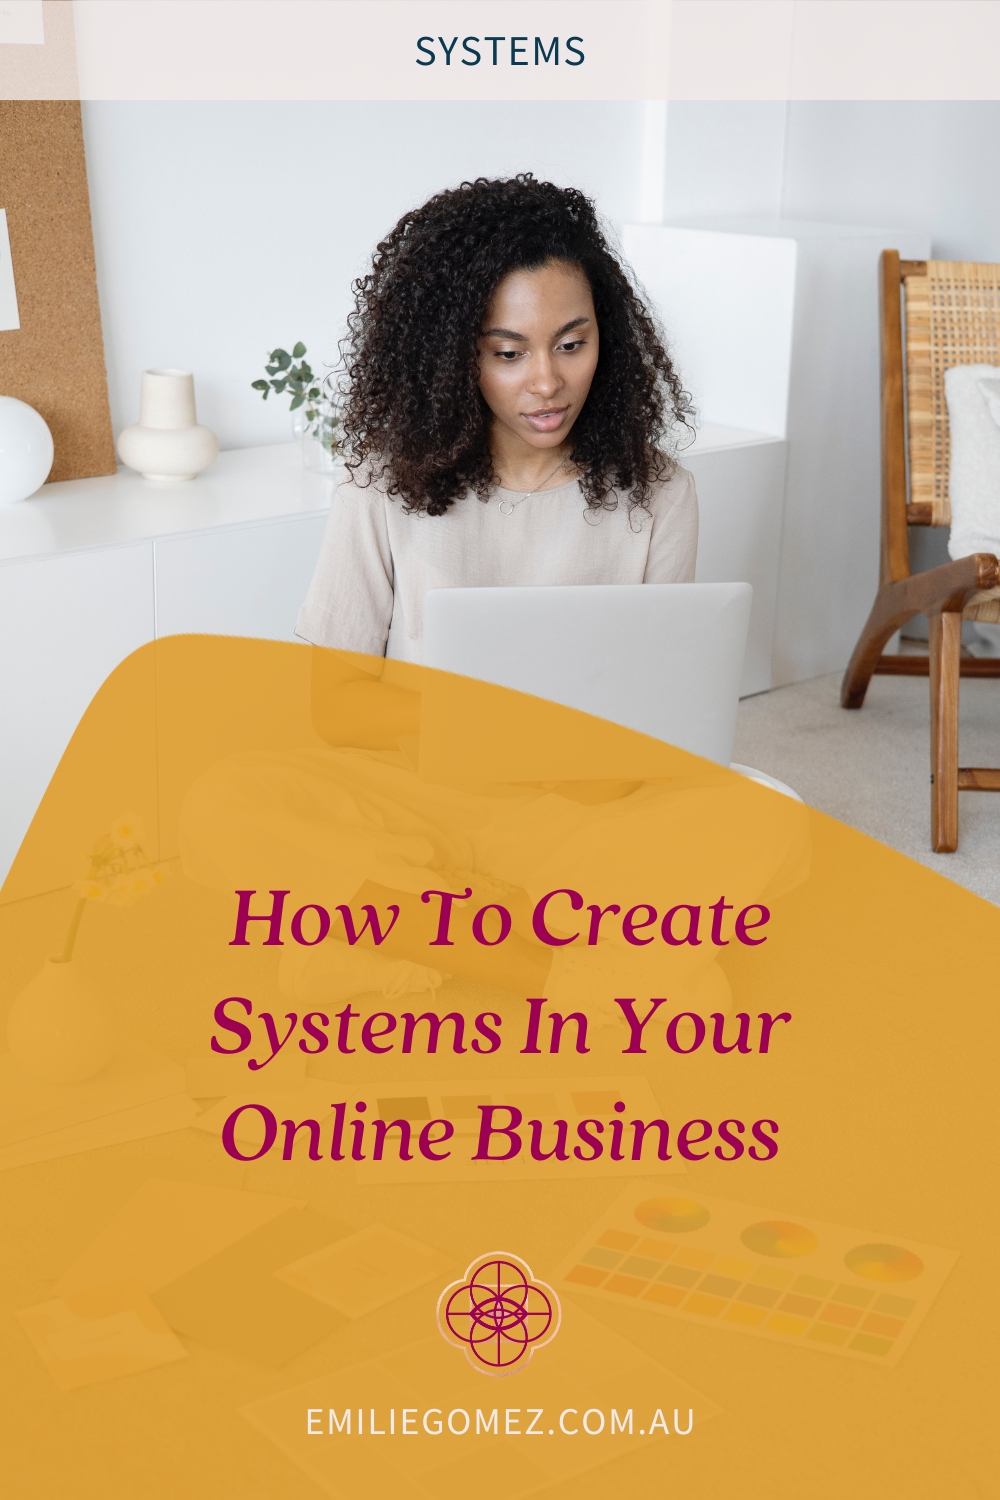 If you're a solopreneur, you know that running a business can be a lot of work. But what if there were a way to make things easier? Business systems can help! By setting up systems and processes, you can free up your time to focus on other aspects of your business. In this post, I’m sharing 5 easy steps to create systems in your online business. Click through to learn more!